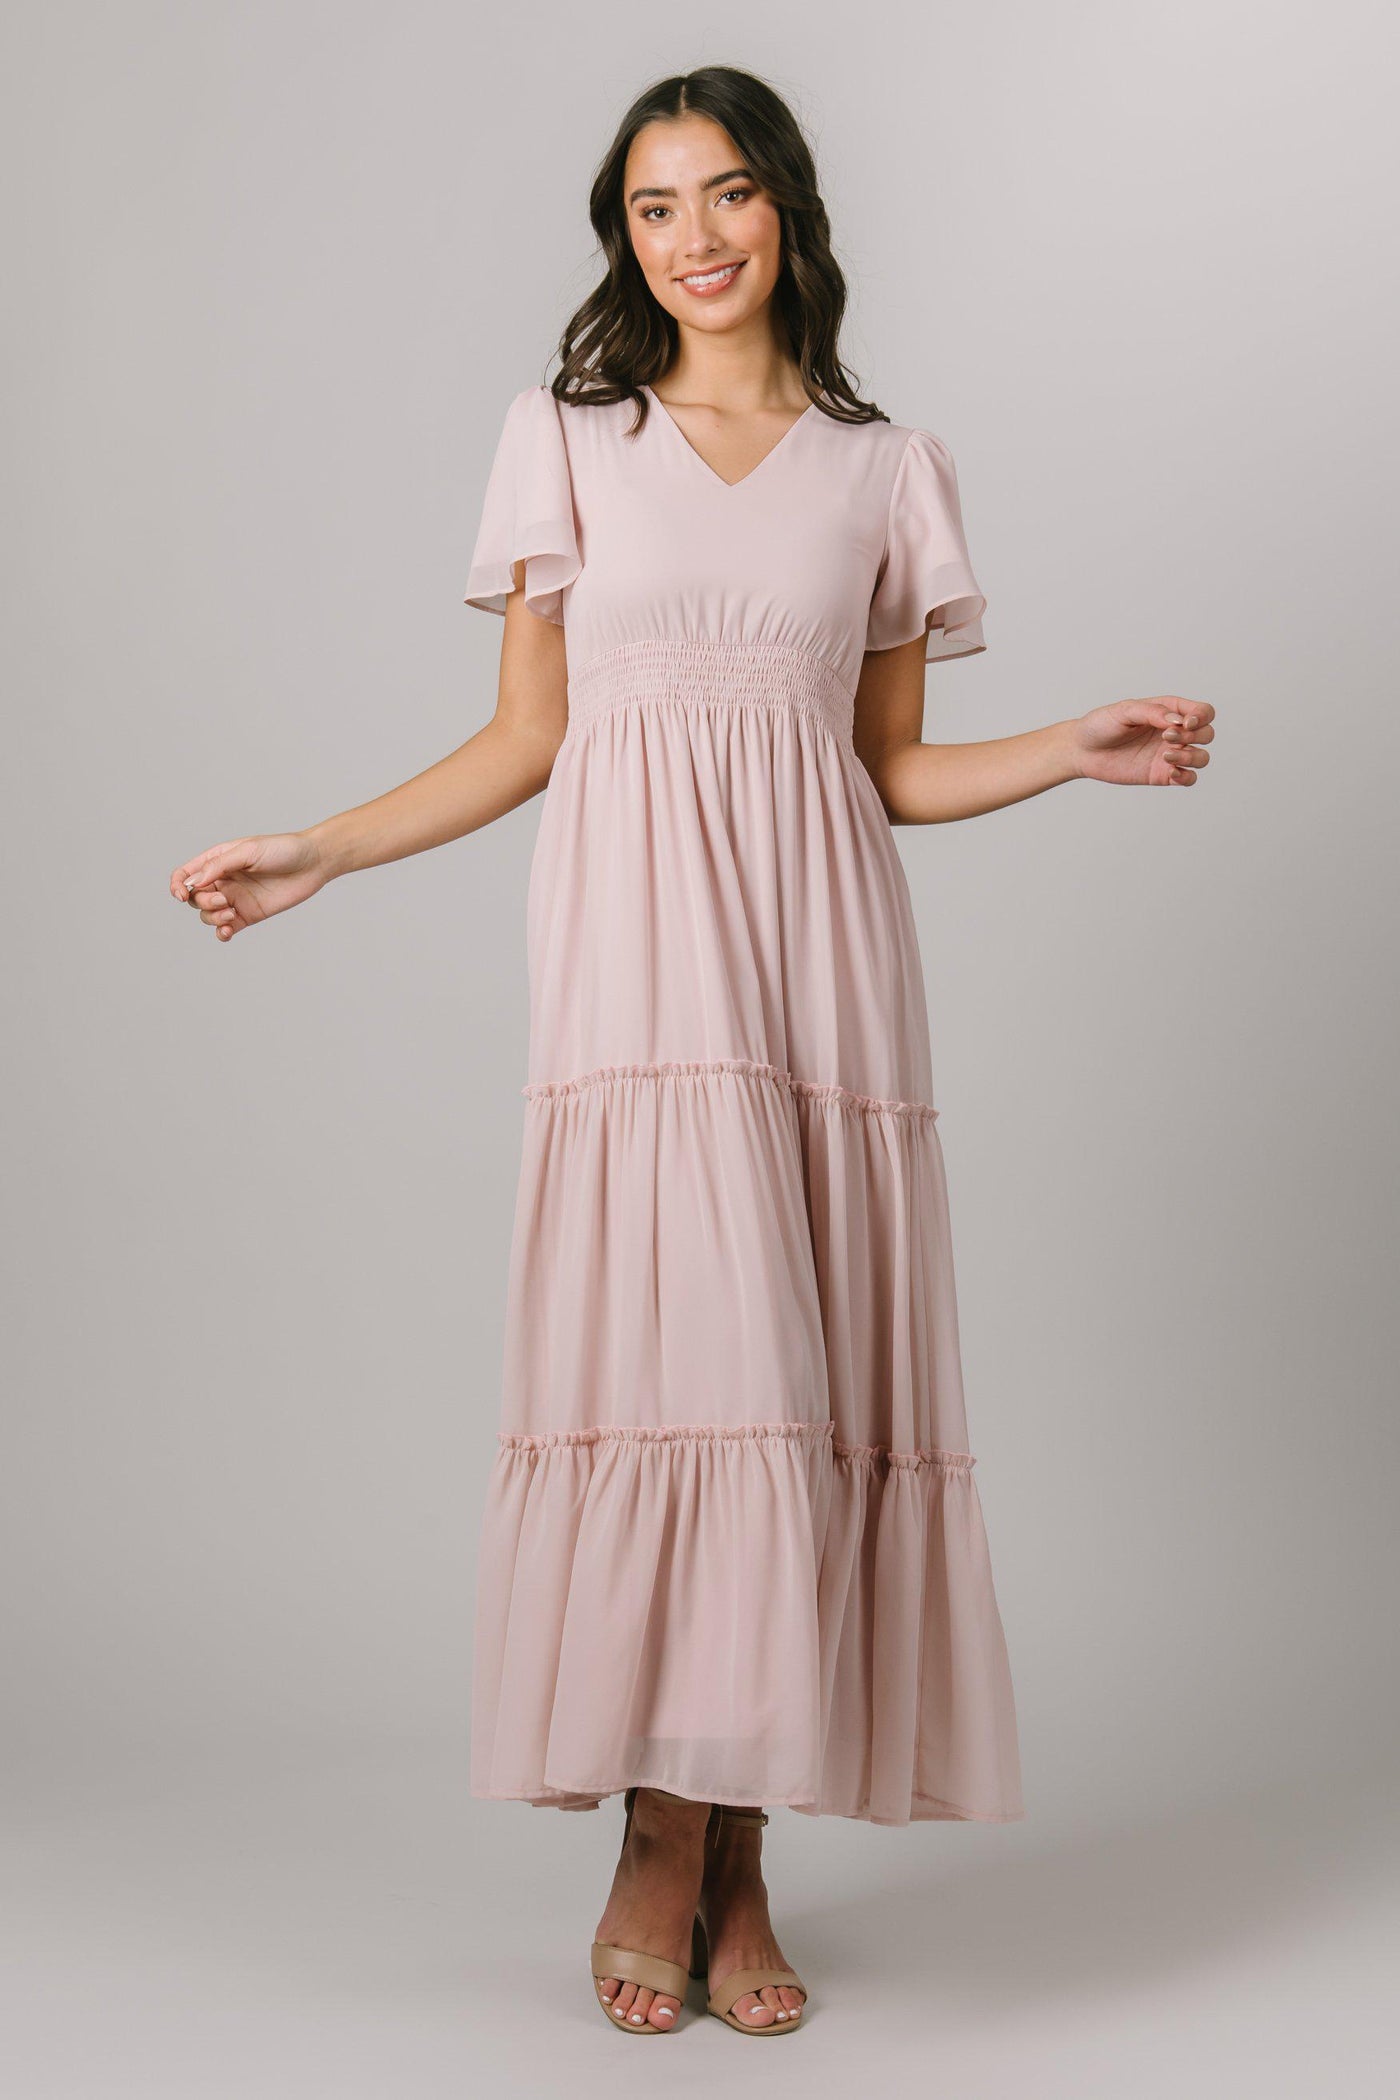 We're loving this modest dress! It features a cinched waistband, flutter sleeves and a tiered skirt. - Modest Dresses - Modest Clothing - Modest Bridesmaid Dresses